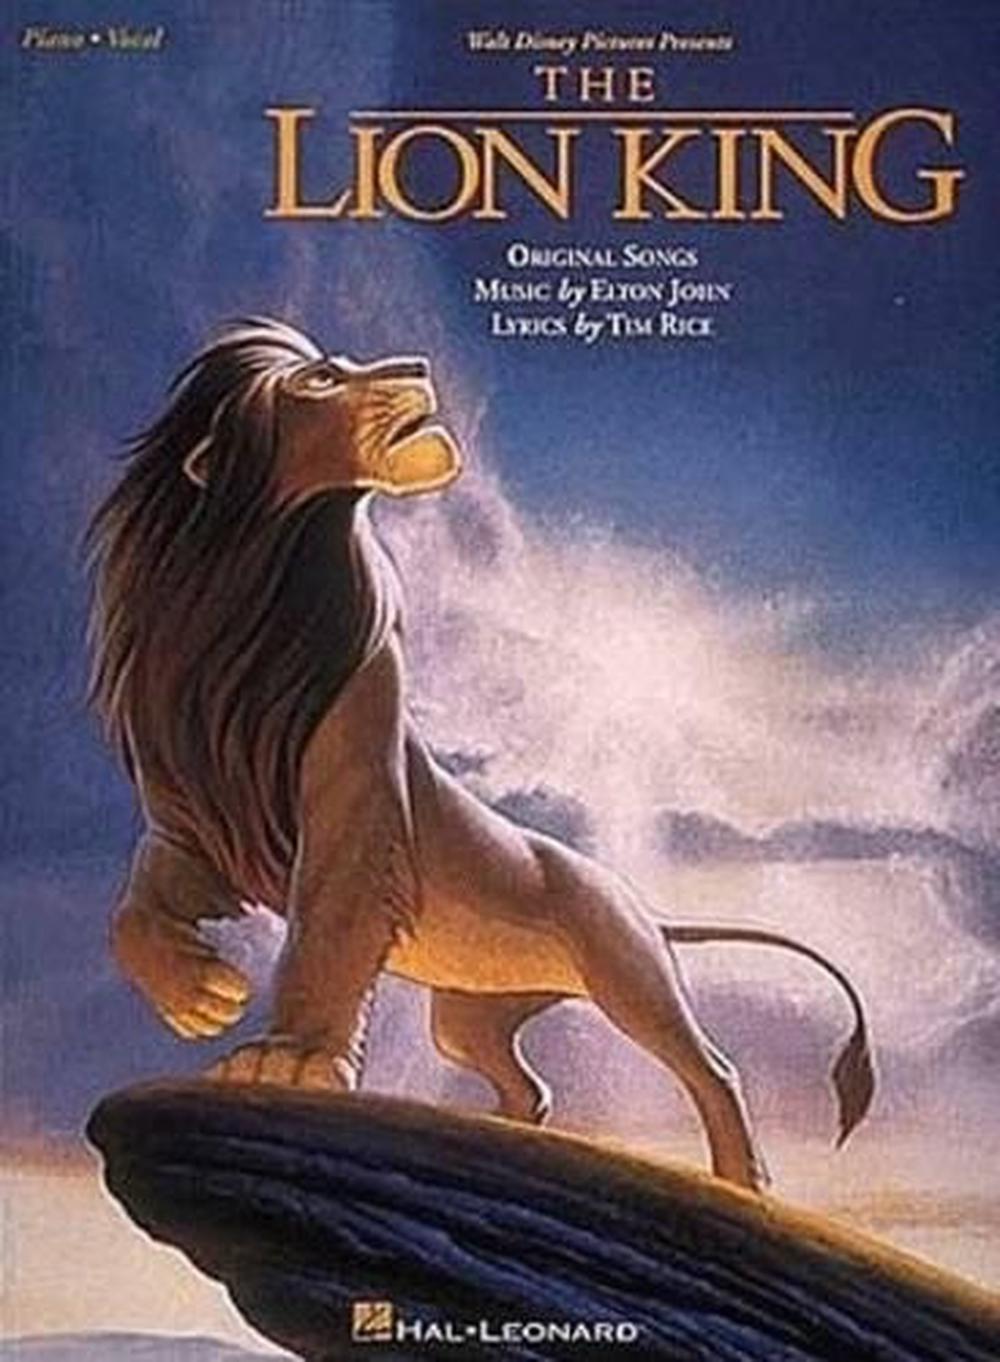 the lion king book review